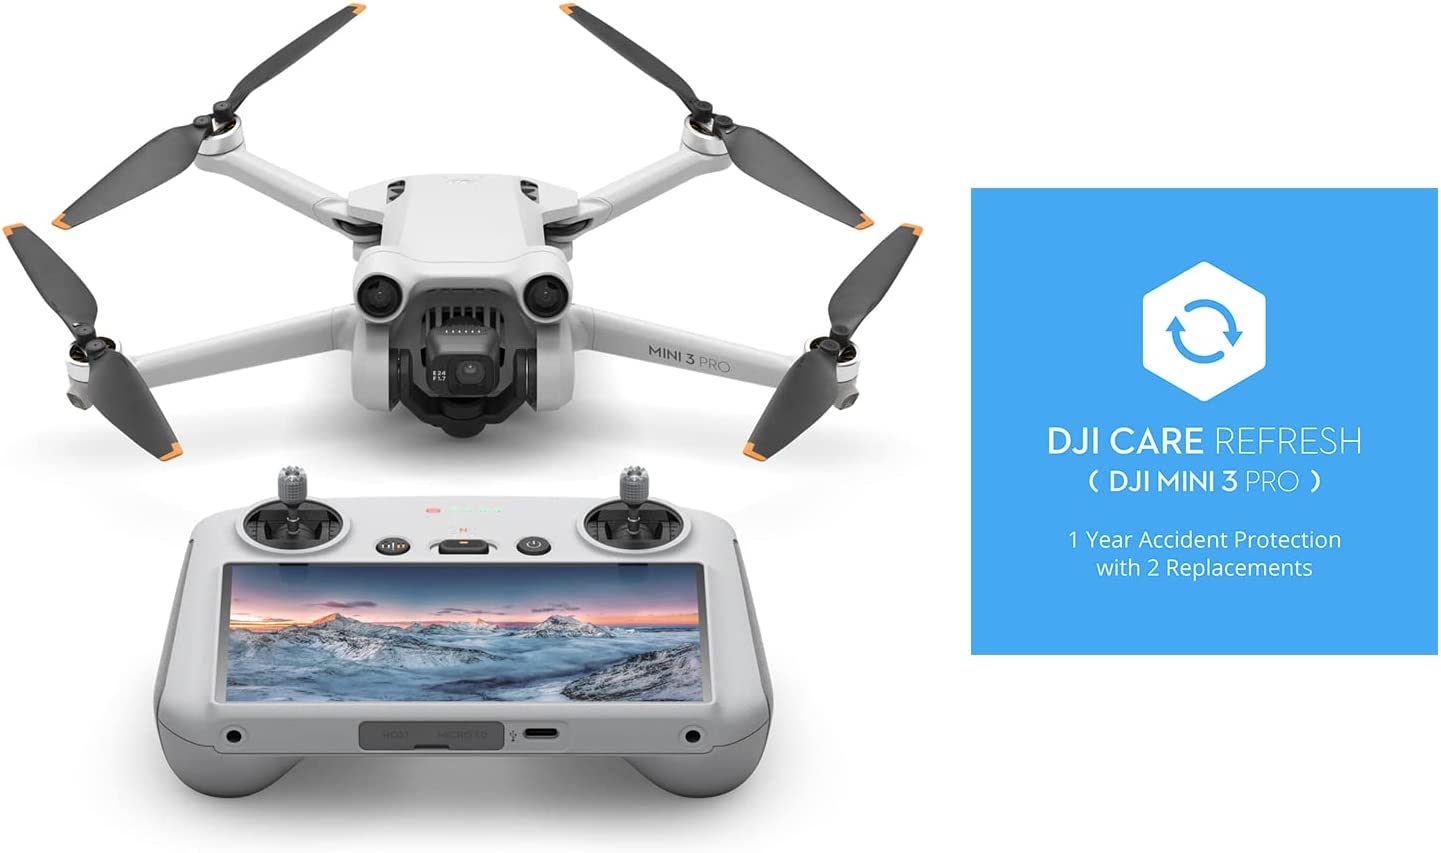 DJI Mini 3 Pro with DJI Smart Control – Lightweight and foldable camera drone with 4K/60fps videos, 48MP photos, 34 minutes